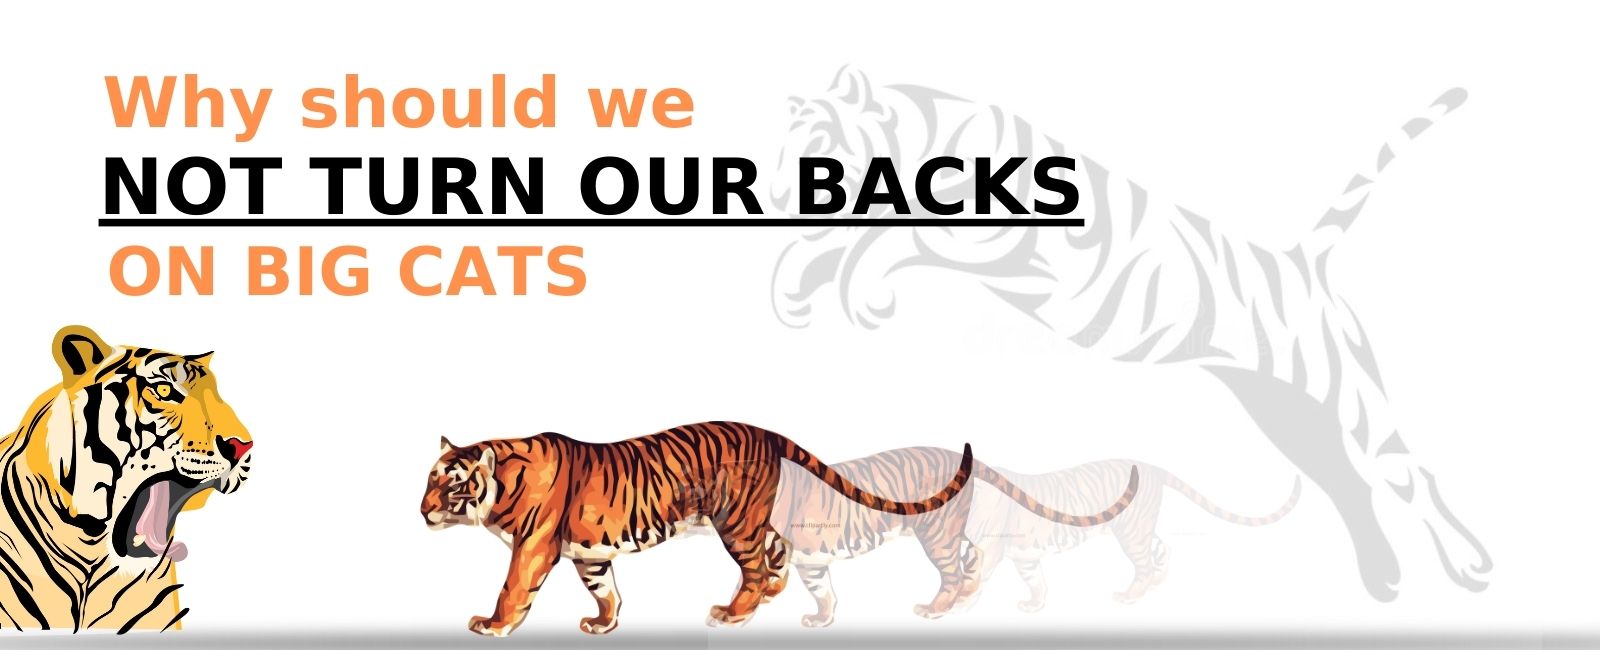 Why Should We Not Turn Our Backs on Big Cats?